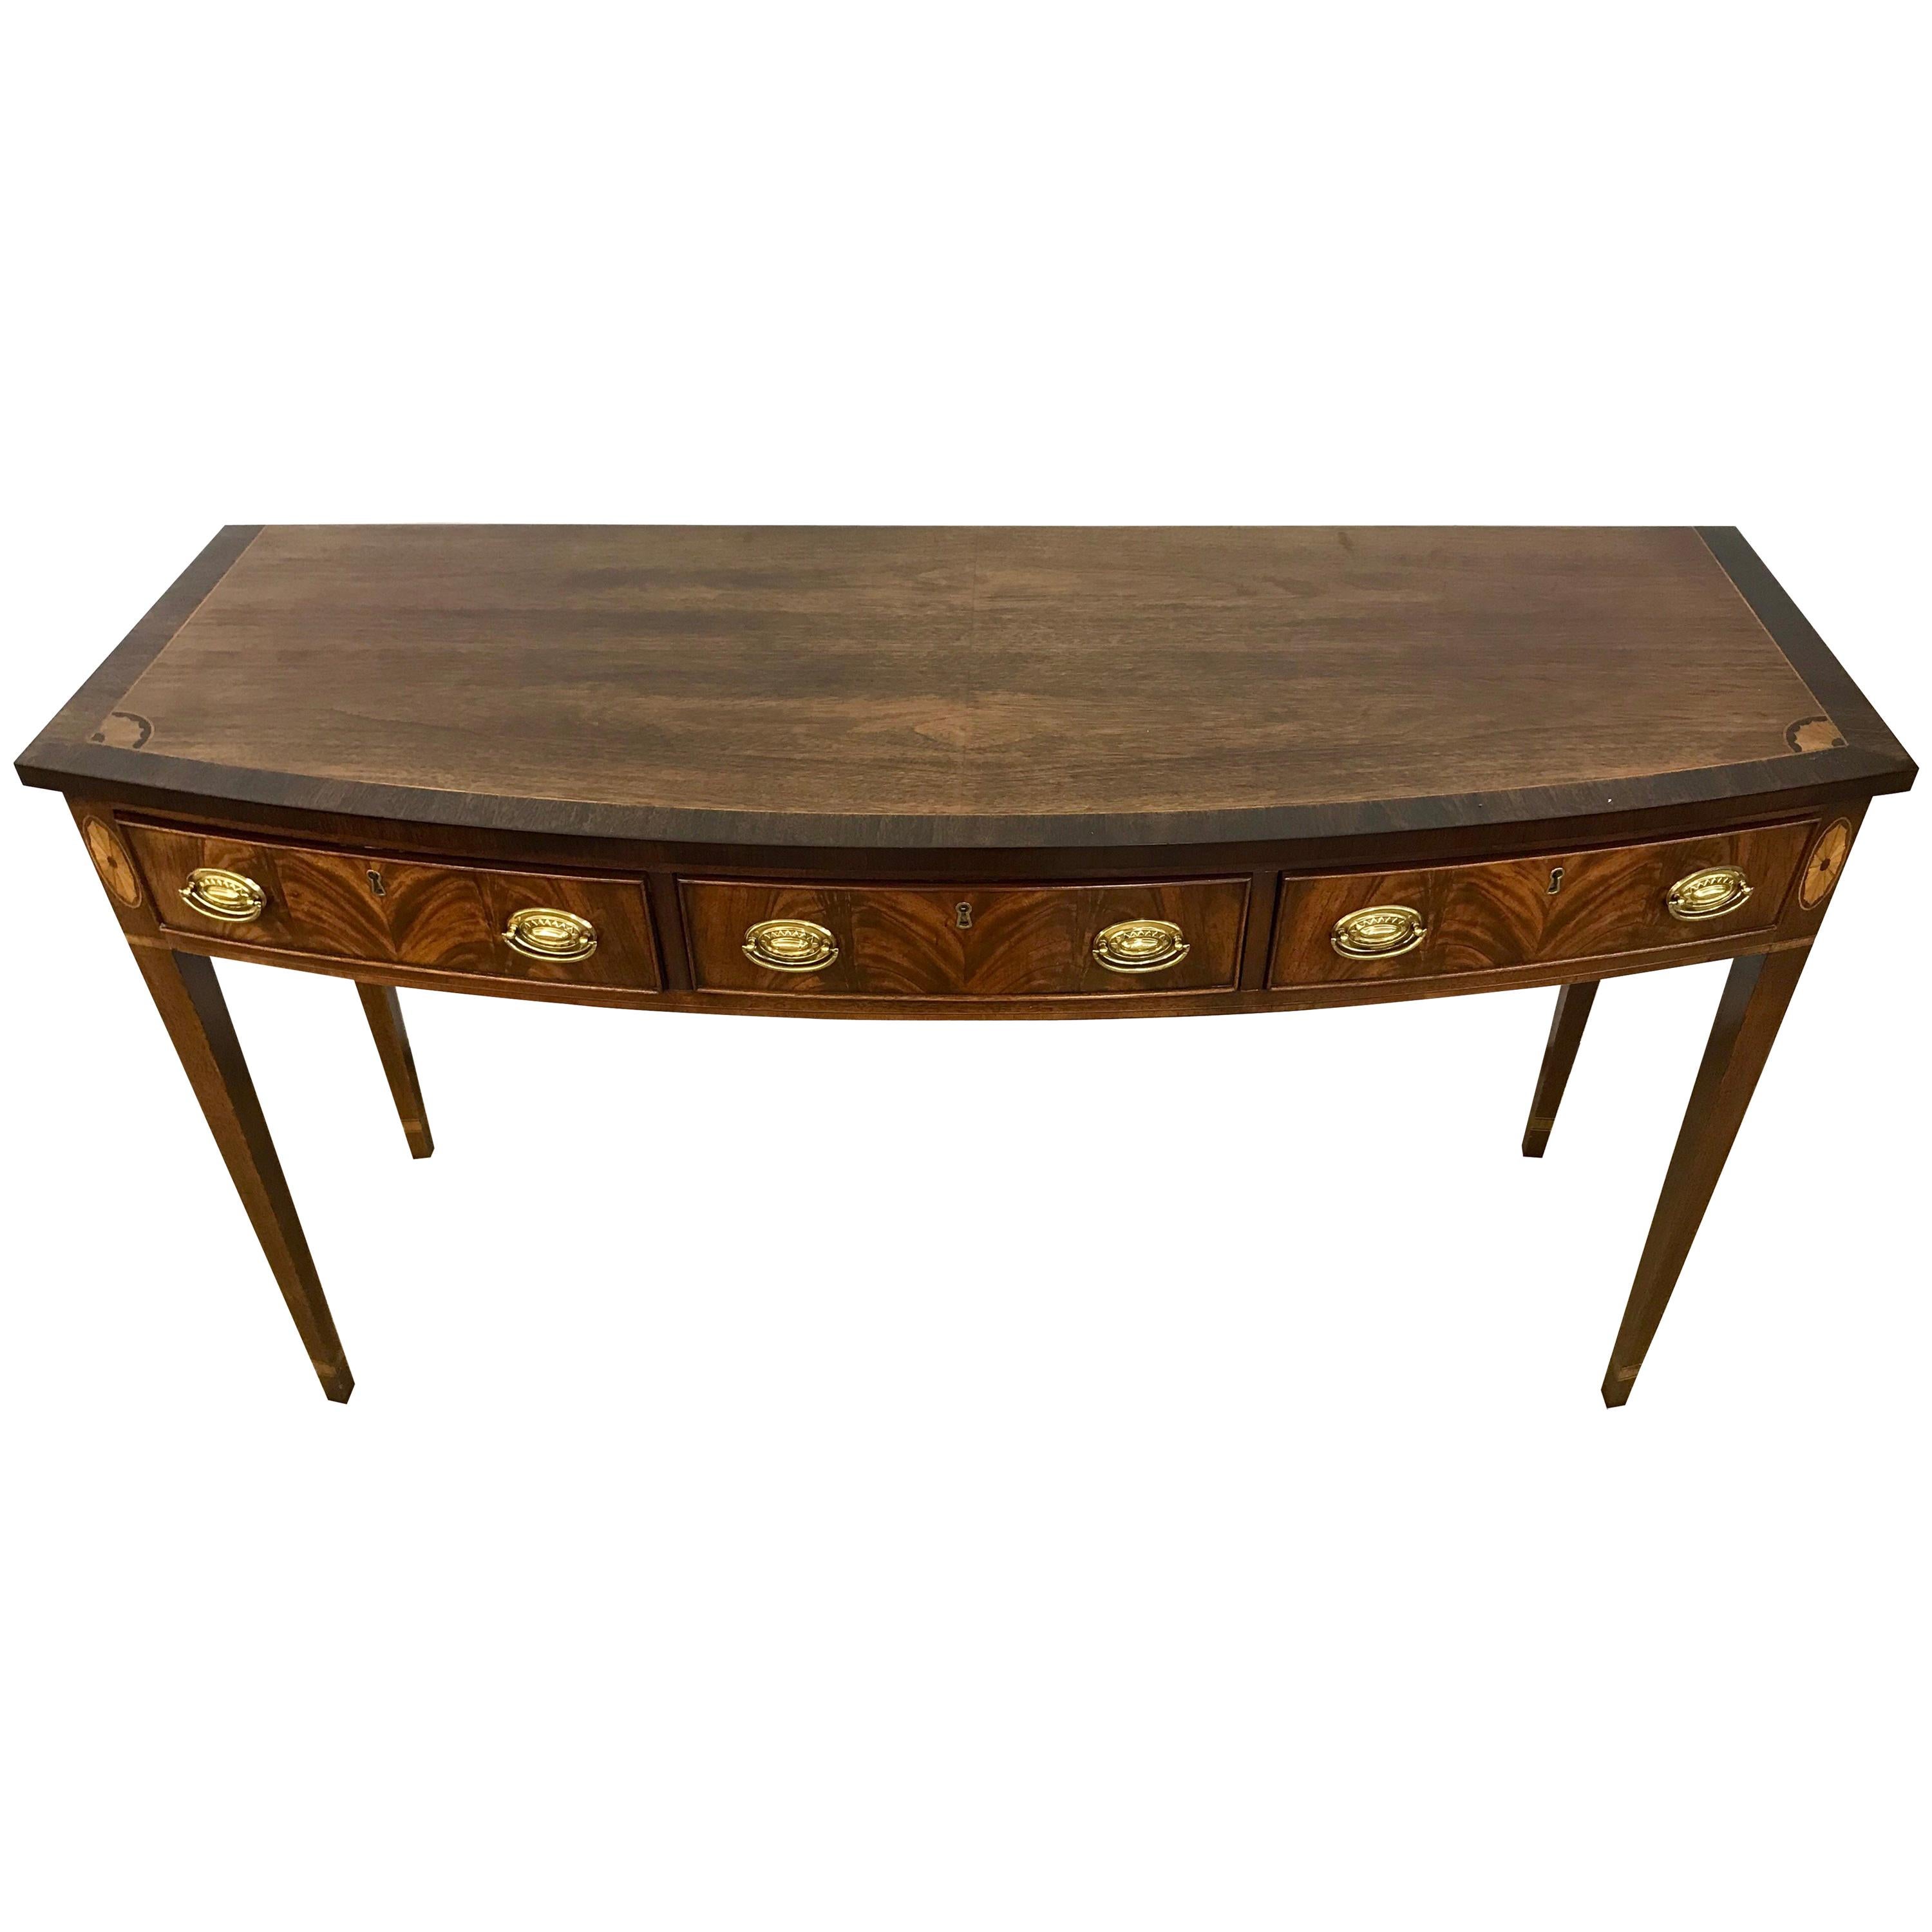 Mahogany Inlaid Sideboard Server Console Table